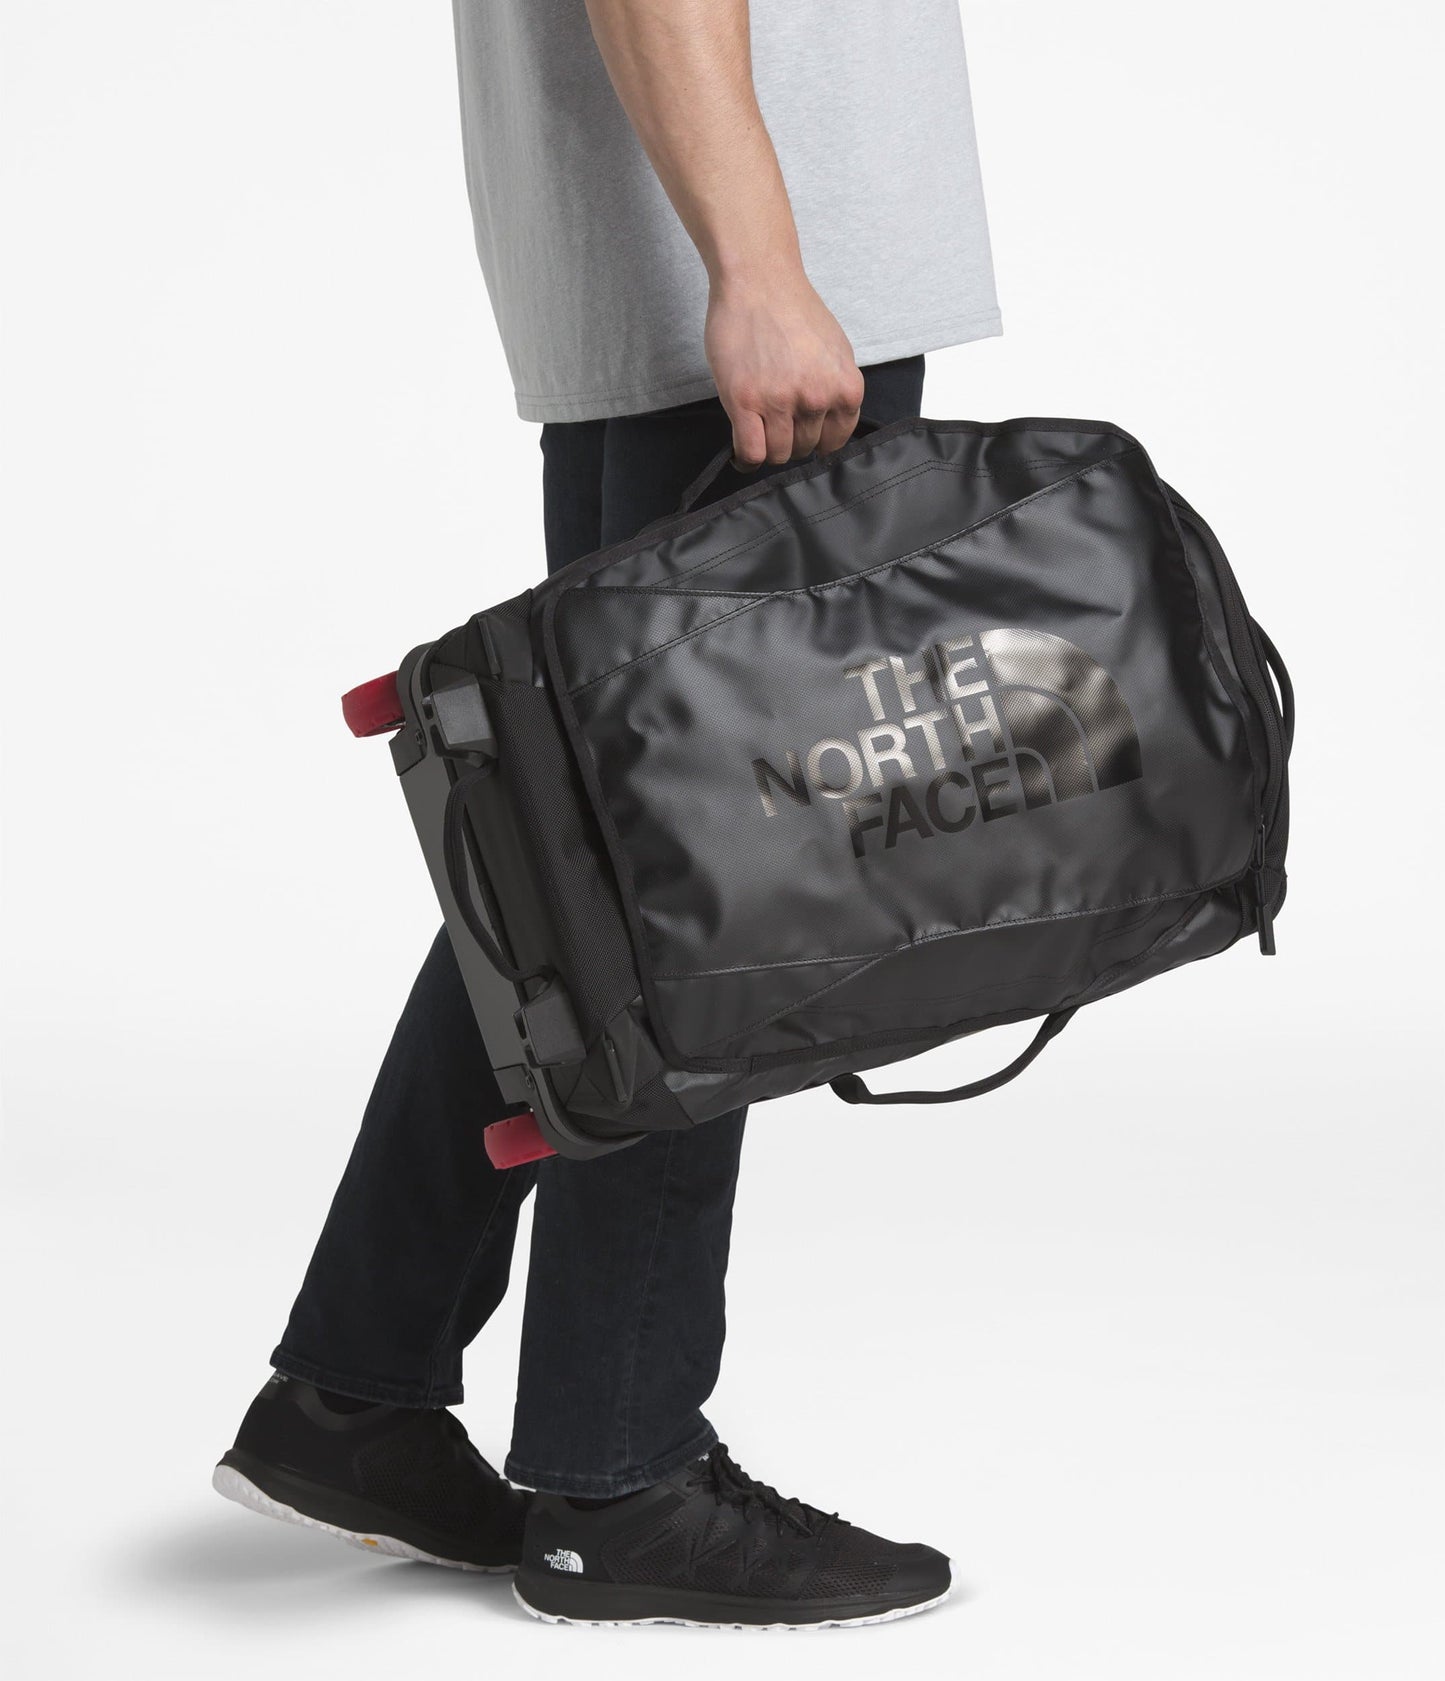 THE NORTH FACE ROLLING THUNDER 22 BLACK